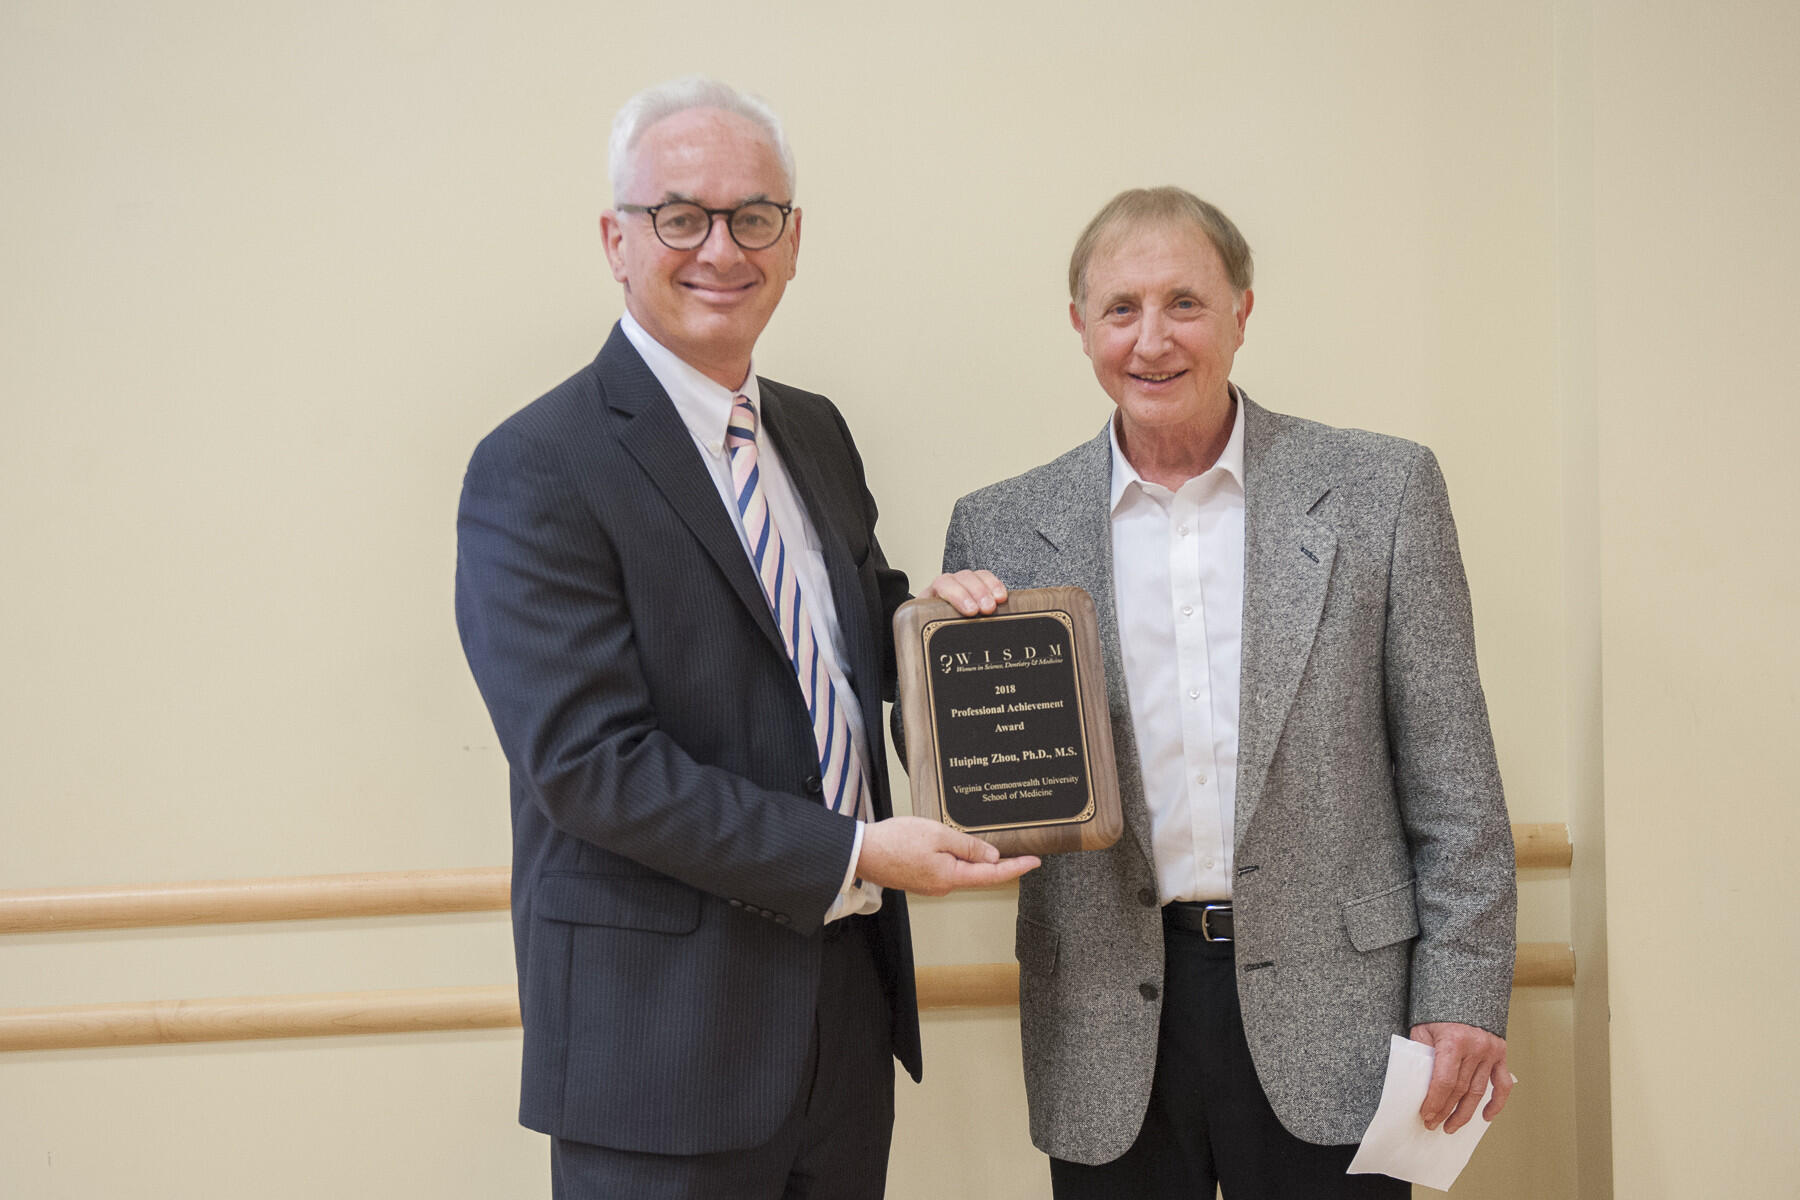 School of Medicine Dean Peter F. Buckley, M.D. with Phillip Hylemon, Ph.D., professor of microbiology and immunology. Hylemon accepted the WISDM Professional Achievement Award on behalf of Huiping Zhou, Ph.D., professor of microbiology and immunology at the VCU School of Medicine.